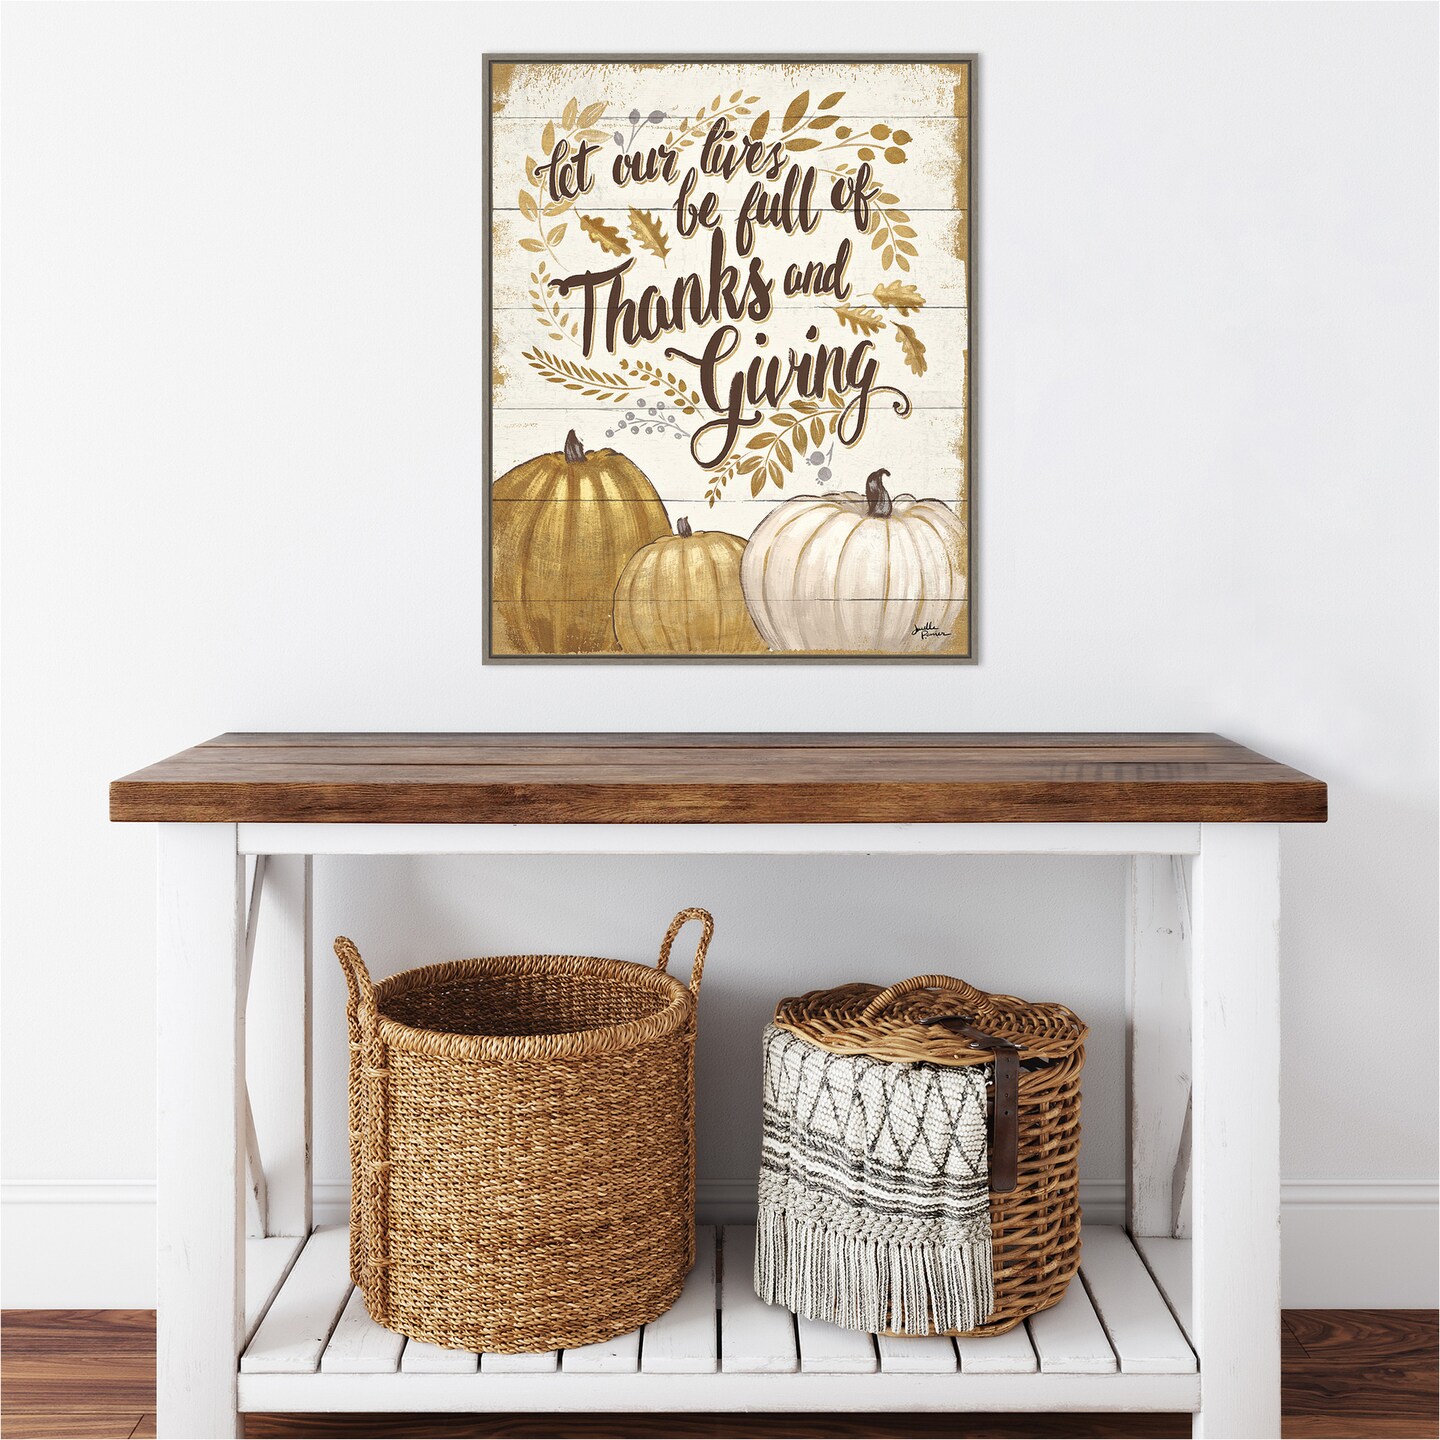 Grateful Season IV by Janelle Penner 23-in. W x 28-in. H. Canvas Wall Art Print Framed in Grey